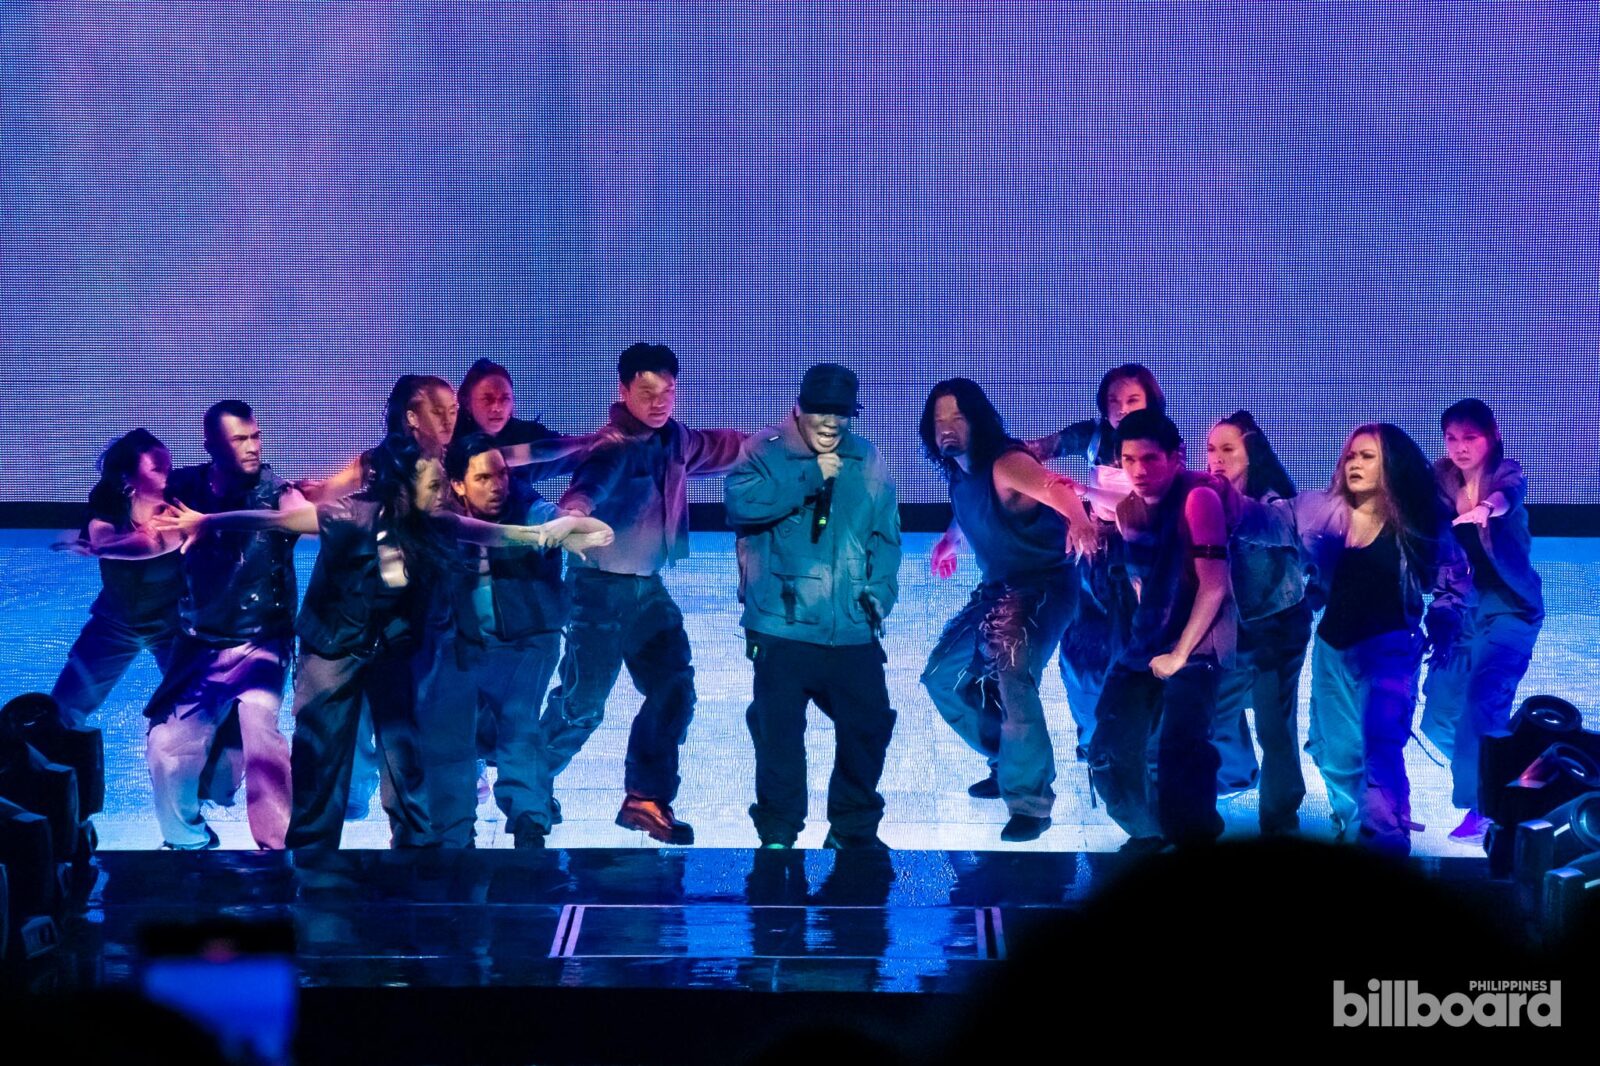 Gloc-9 performing as a special guest at Gary Valenciano's 40th Anniversary Concert 'Pure Energy'